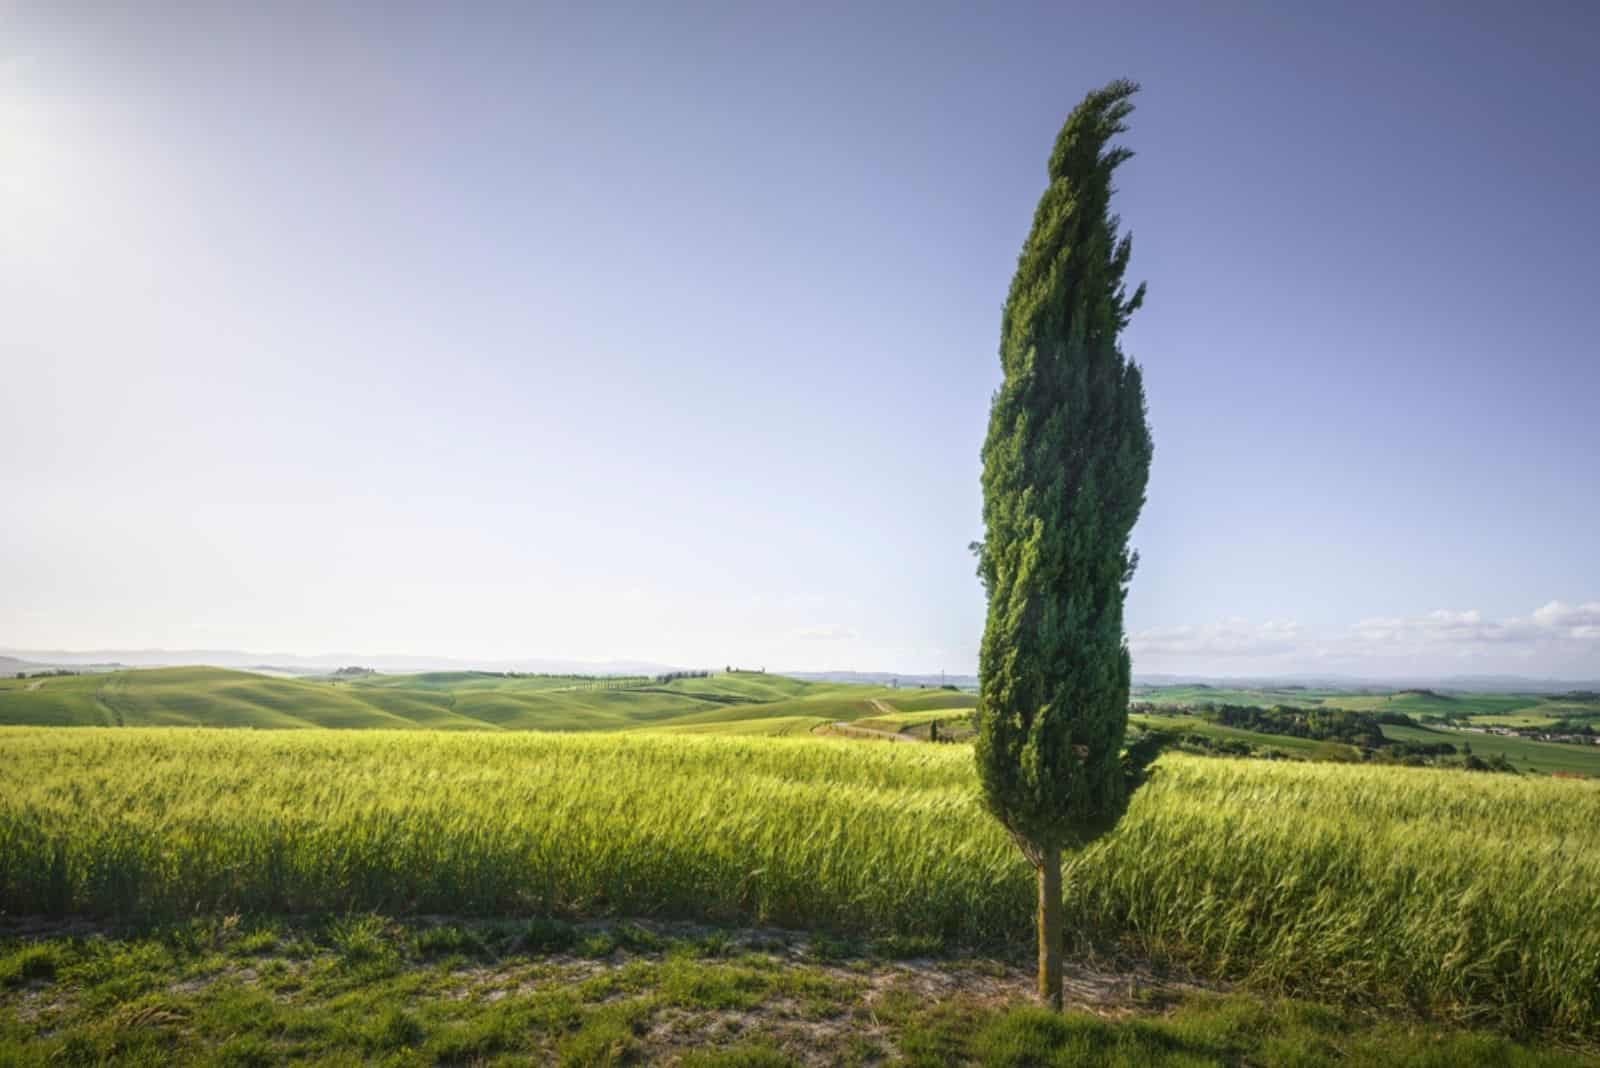 cypress tree and wheat field along the route 